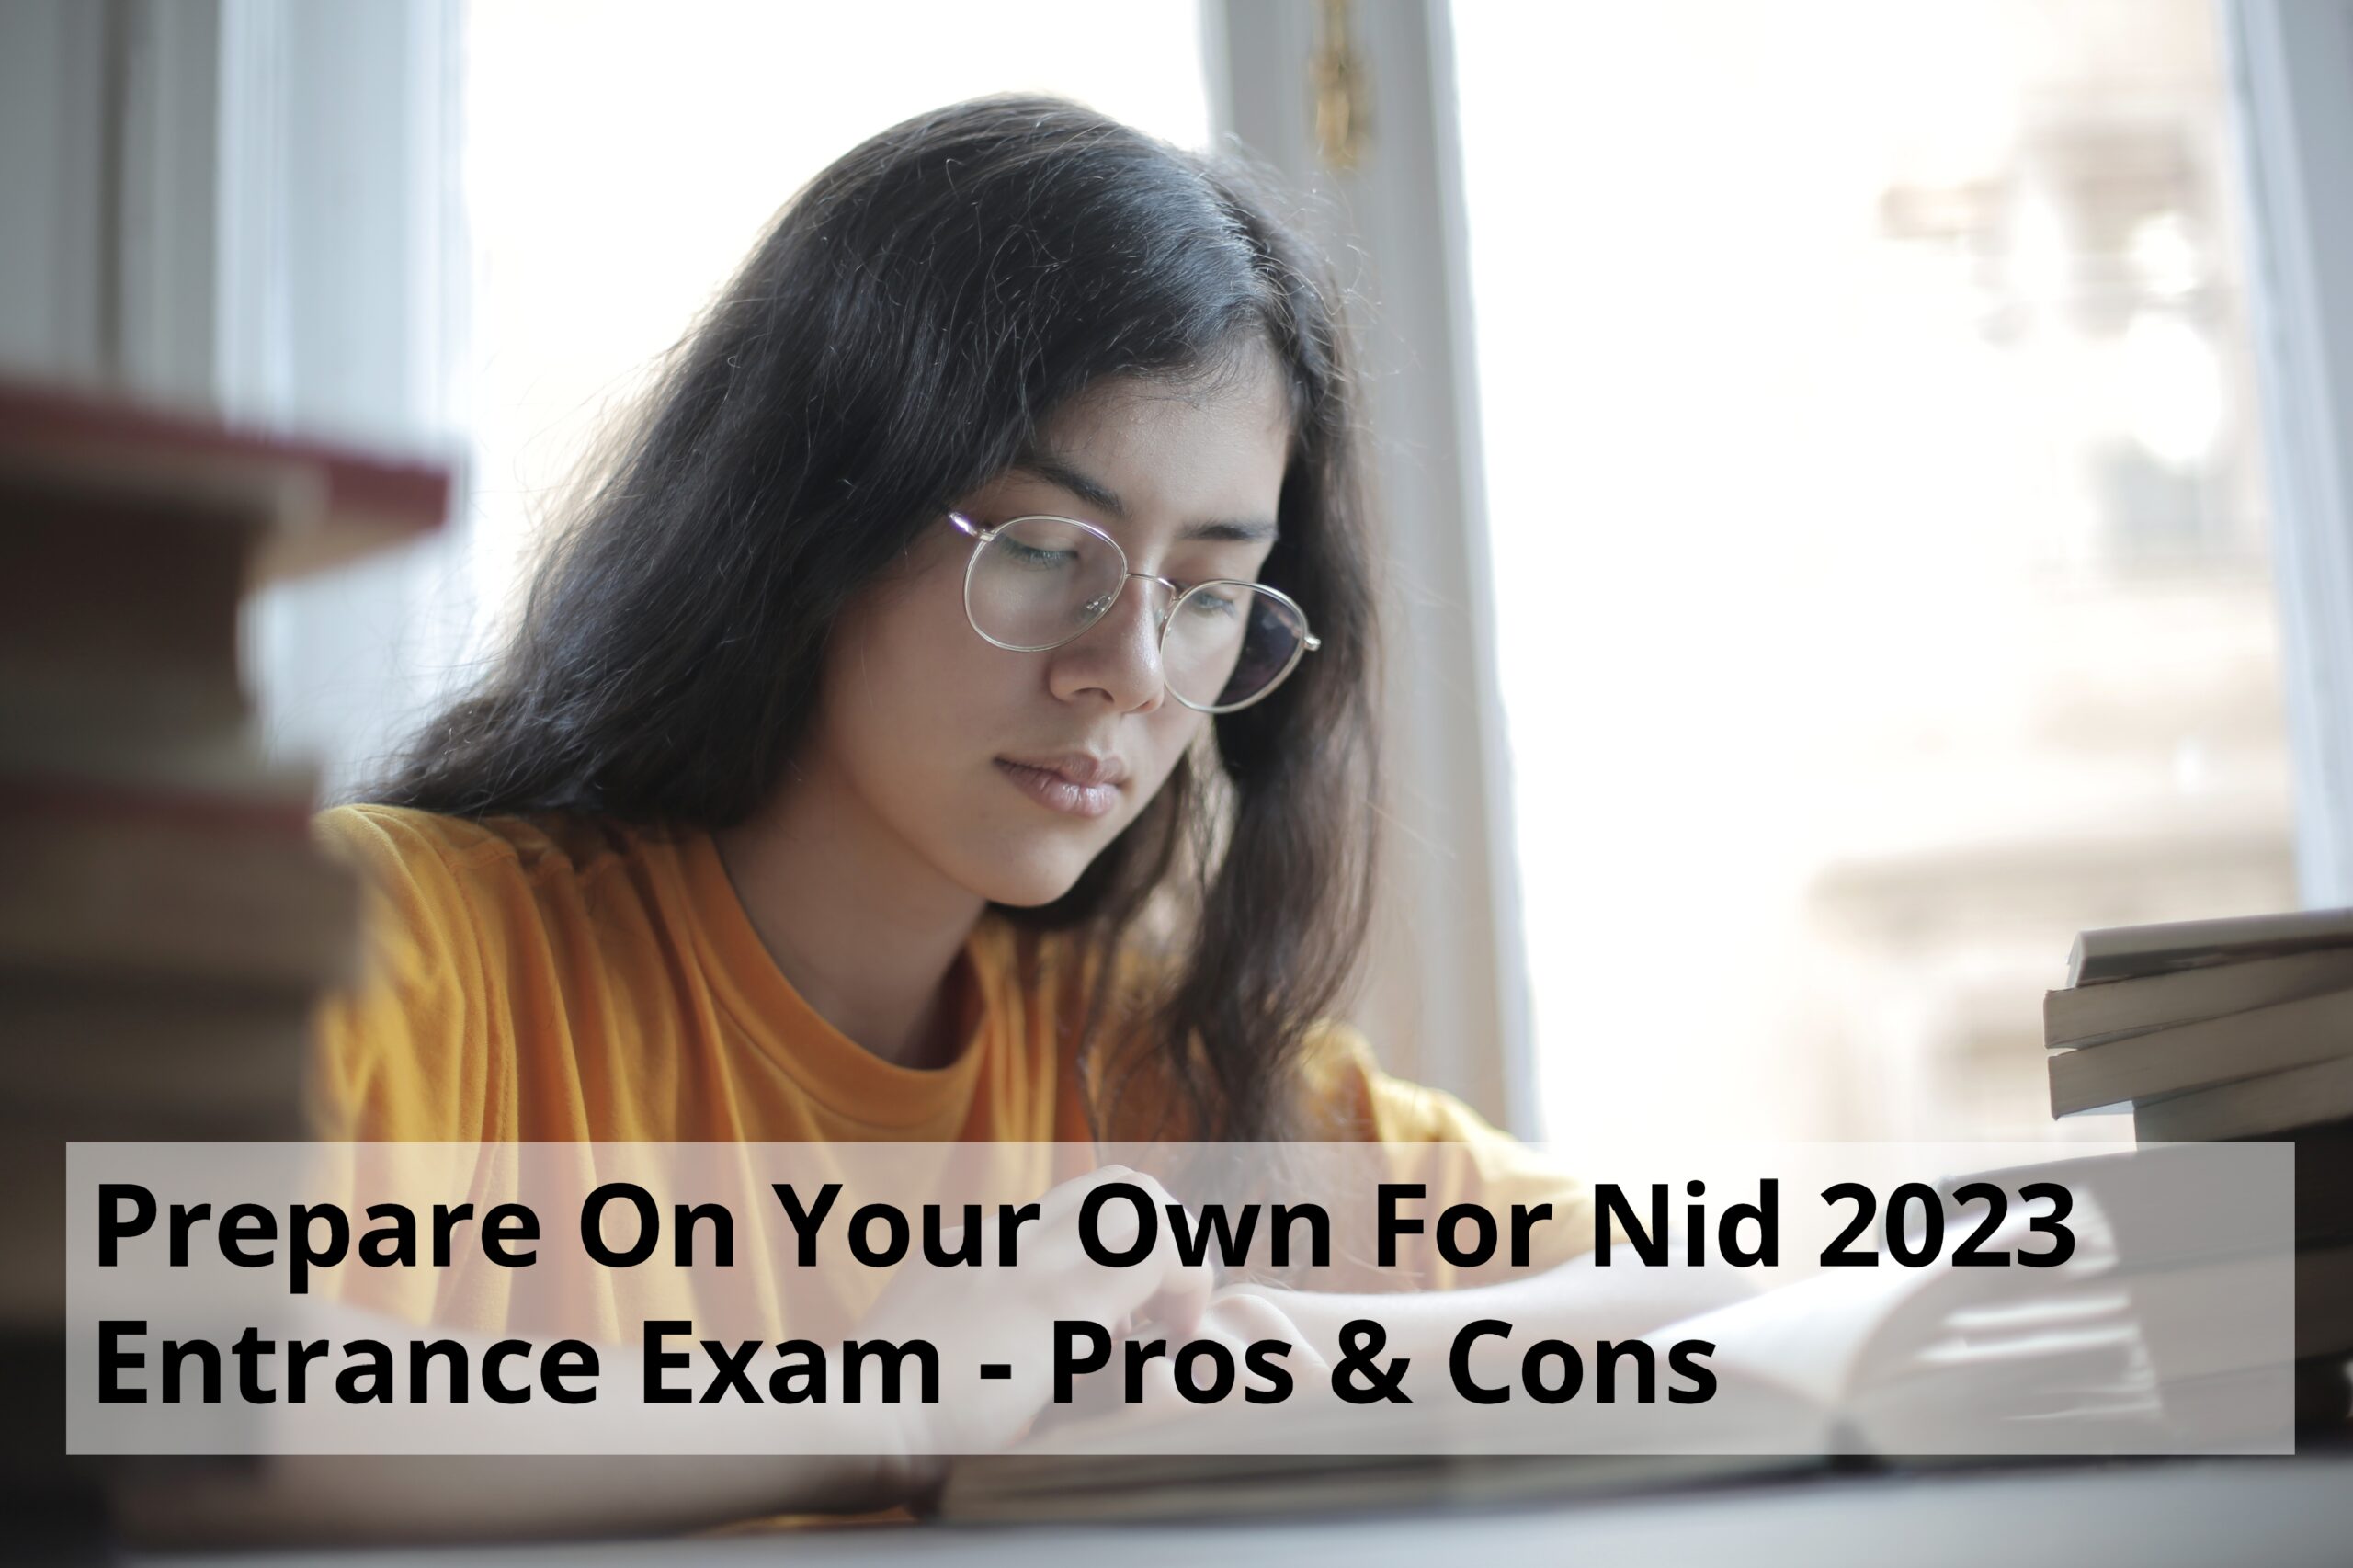 Prepare On Your Own For Nid 2023 Entrance Exam – Pros & Cons